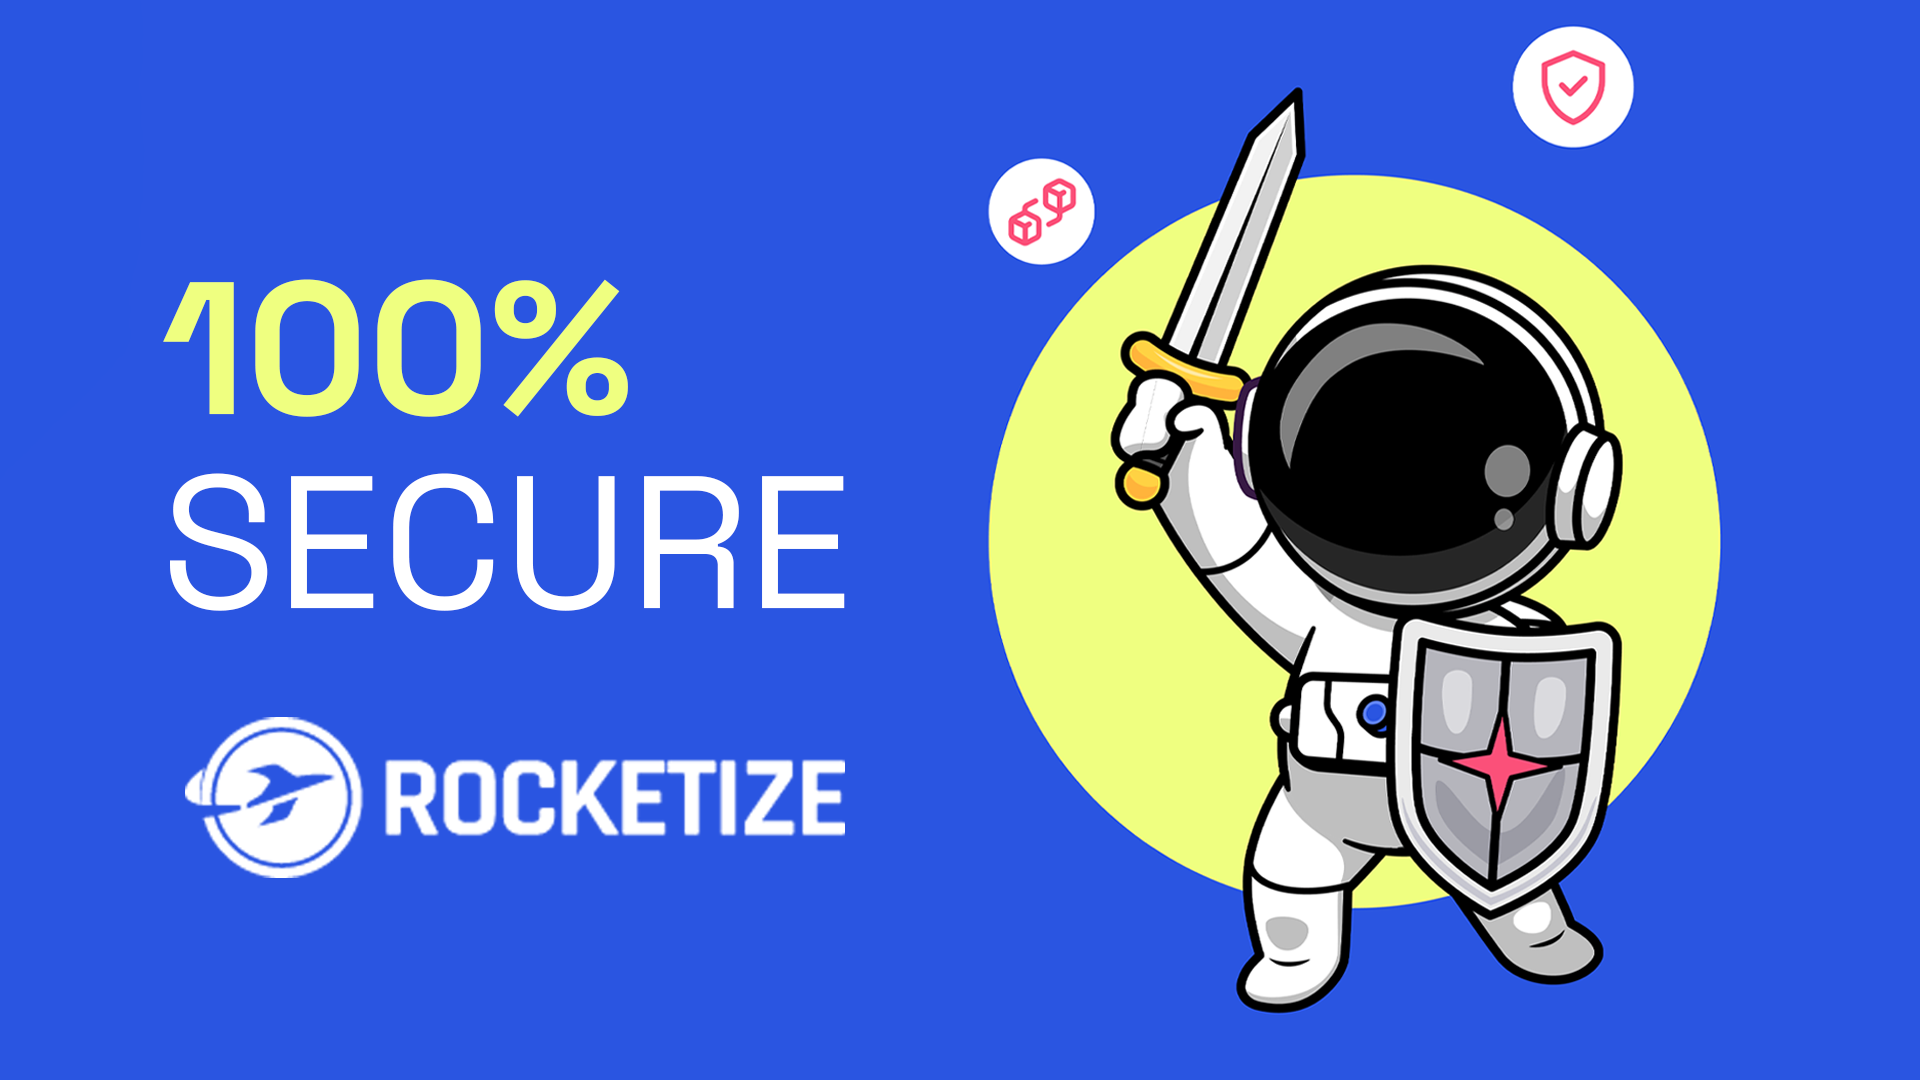 Axie Infinity and The Sandbox Revolutionized The Metaverse, But Rocketize Token Will Change The Way Investors View Meme Coins